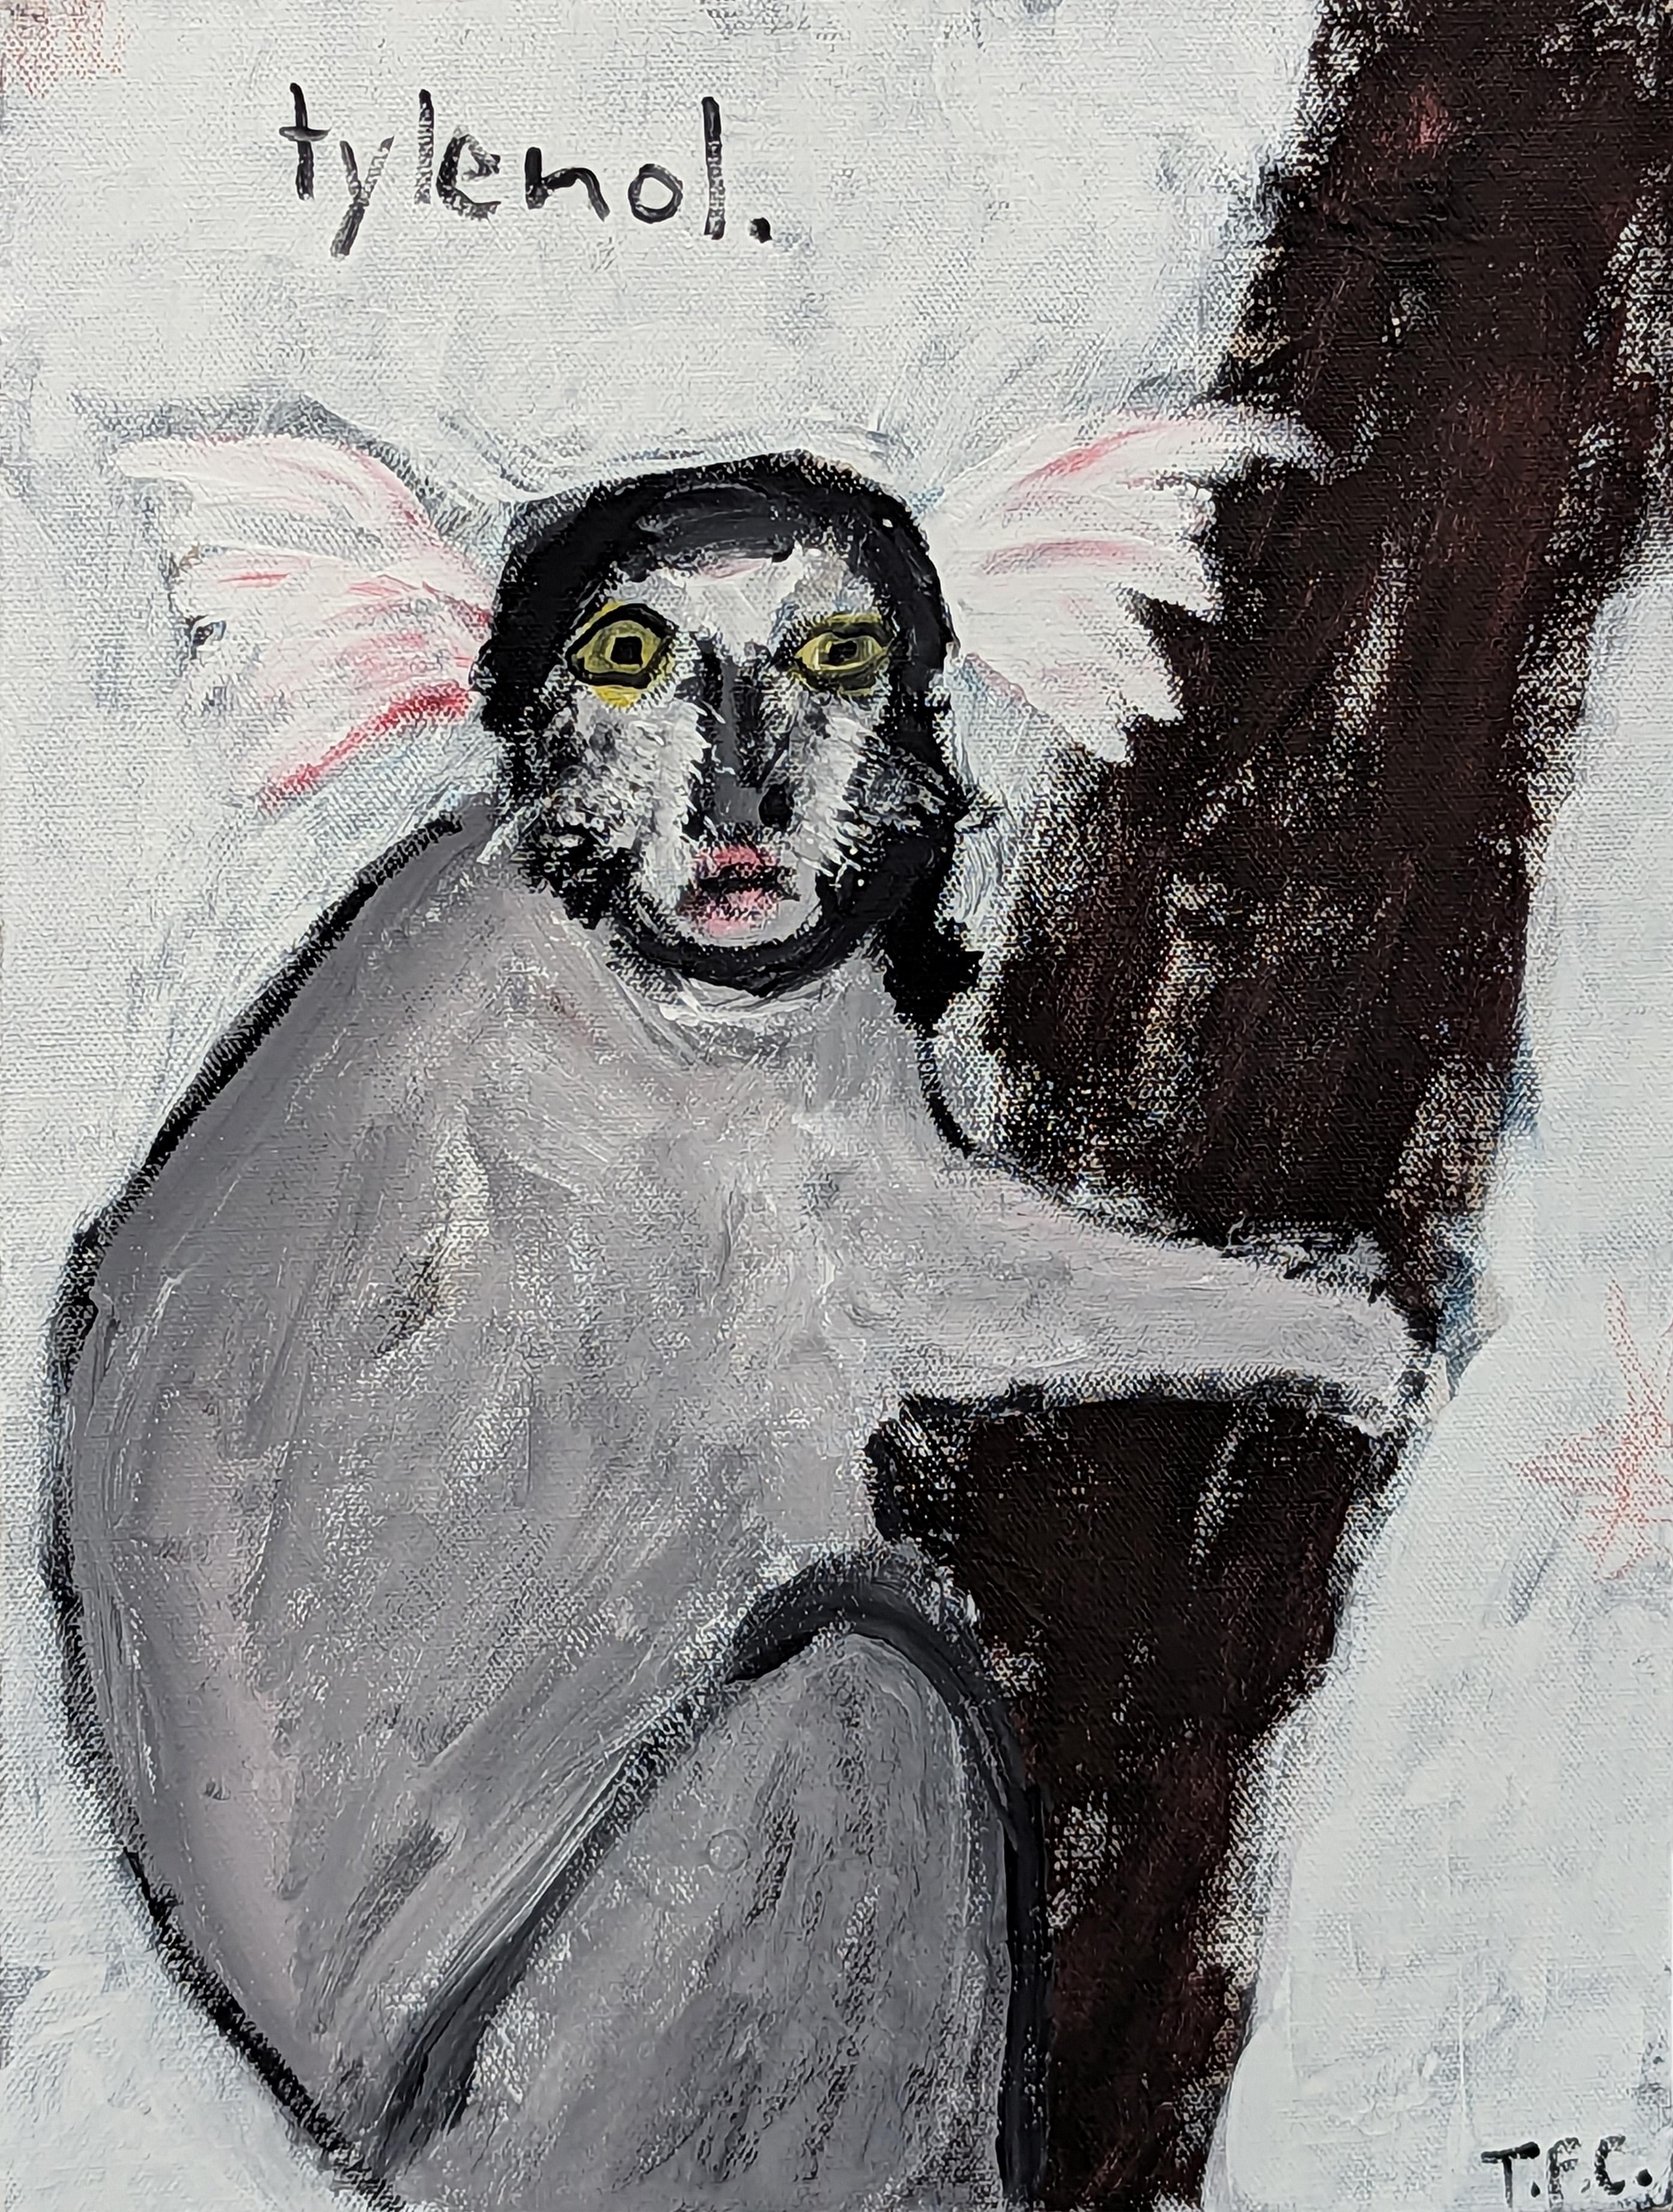 Abstract animal painting by contemporary artist Tyler Casey. The work features a gestural depiction of a marmoset with the word "Tylenol" written above it. Signed in the front lower right corner. 

Artist Biography: Tyler Casey is a self-taught